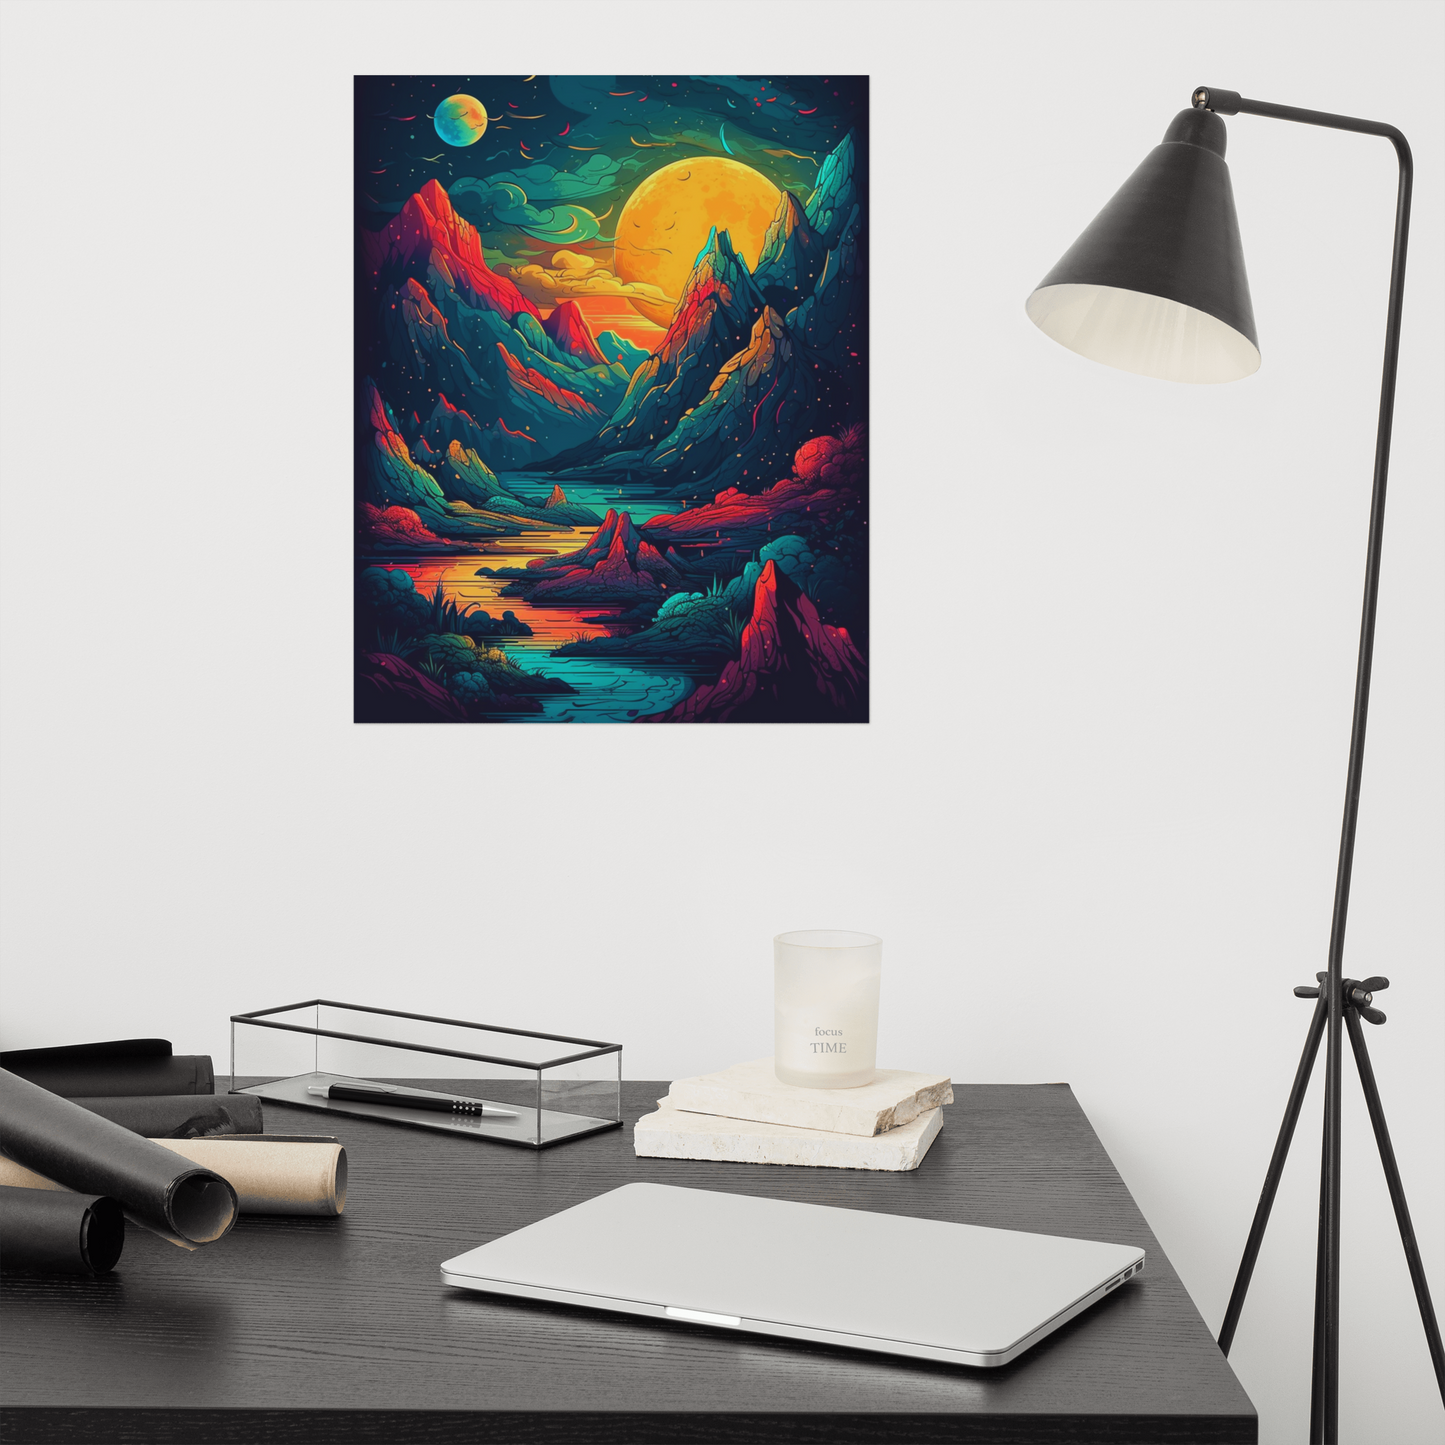 Colorful Poster: Fantasy Art of Extraterrestrial Landscape with Fiery Sunset and Planetary Sky